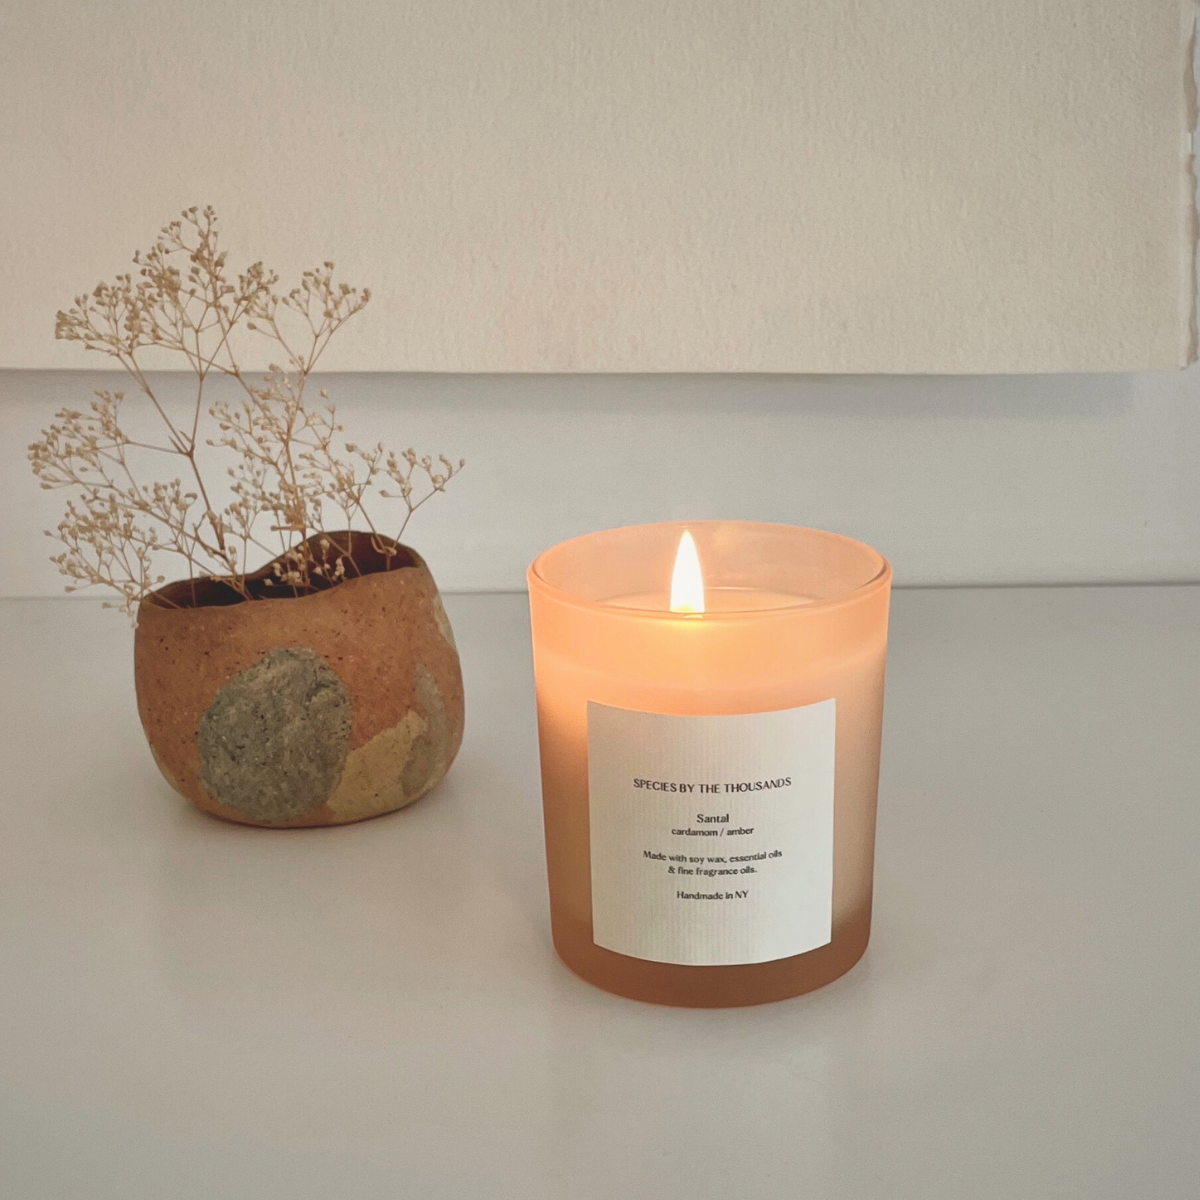 Santal Scented Soy Candle